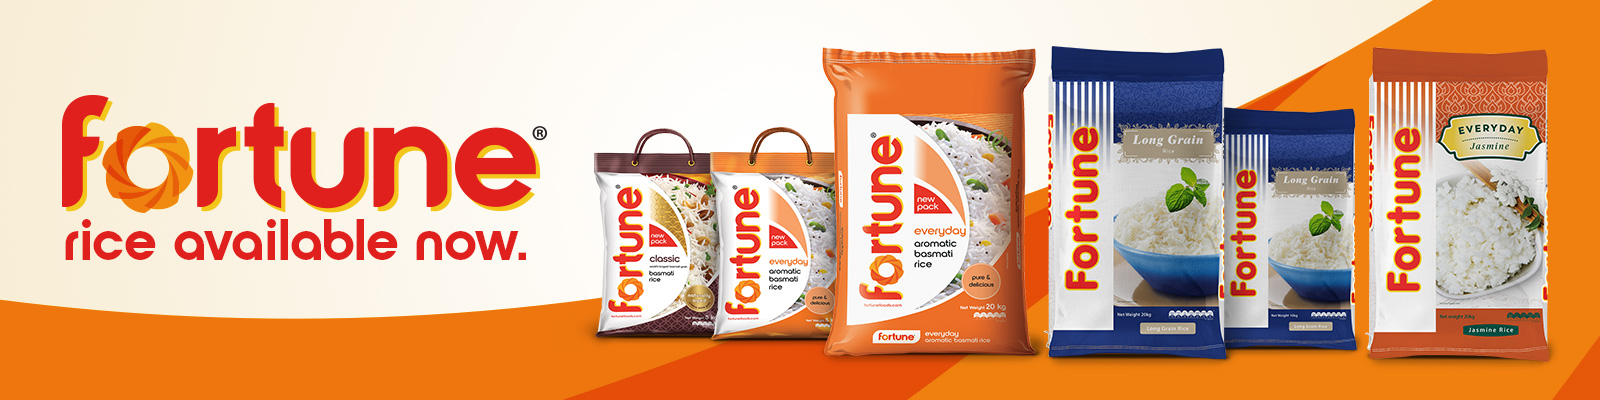 Fortune Rice available now.